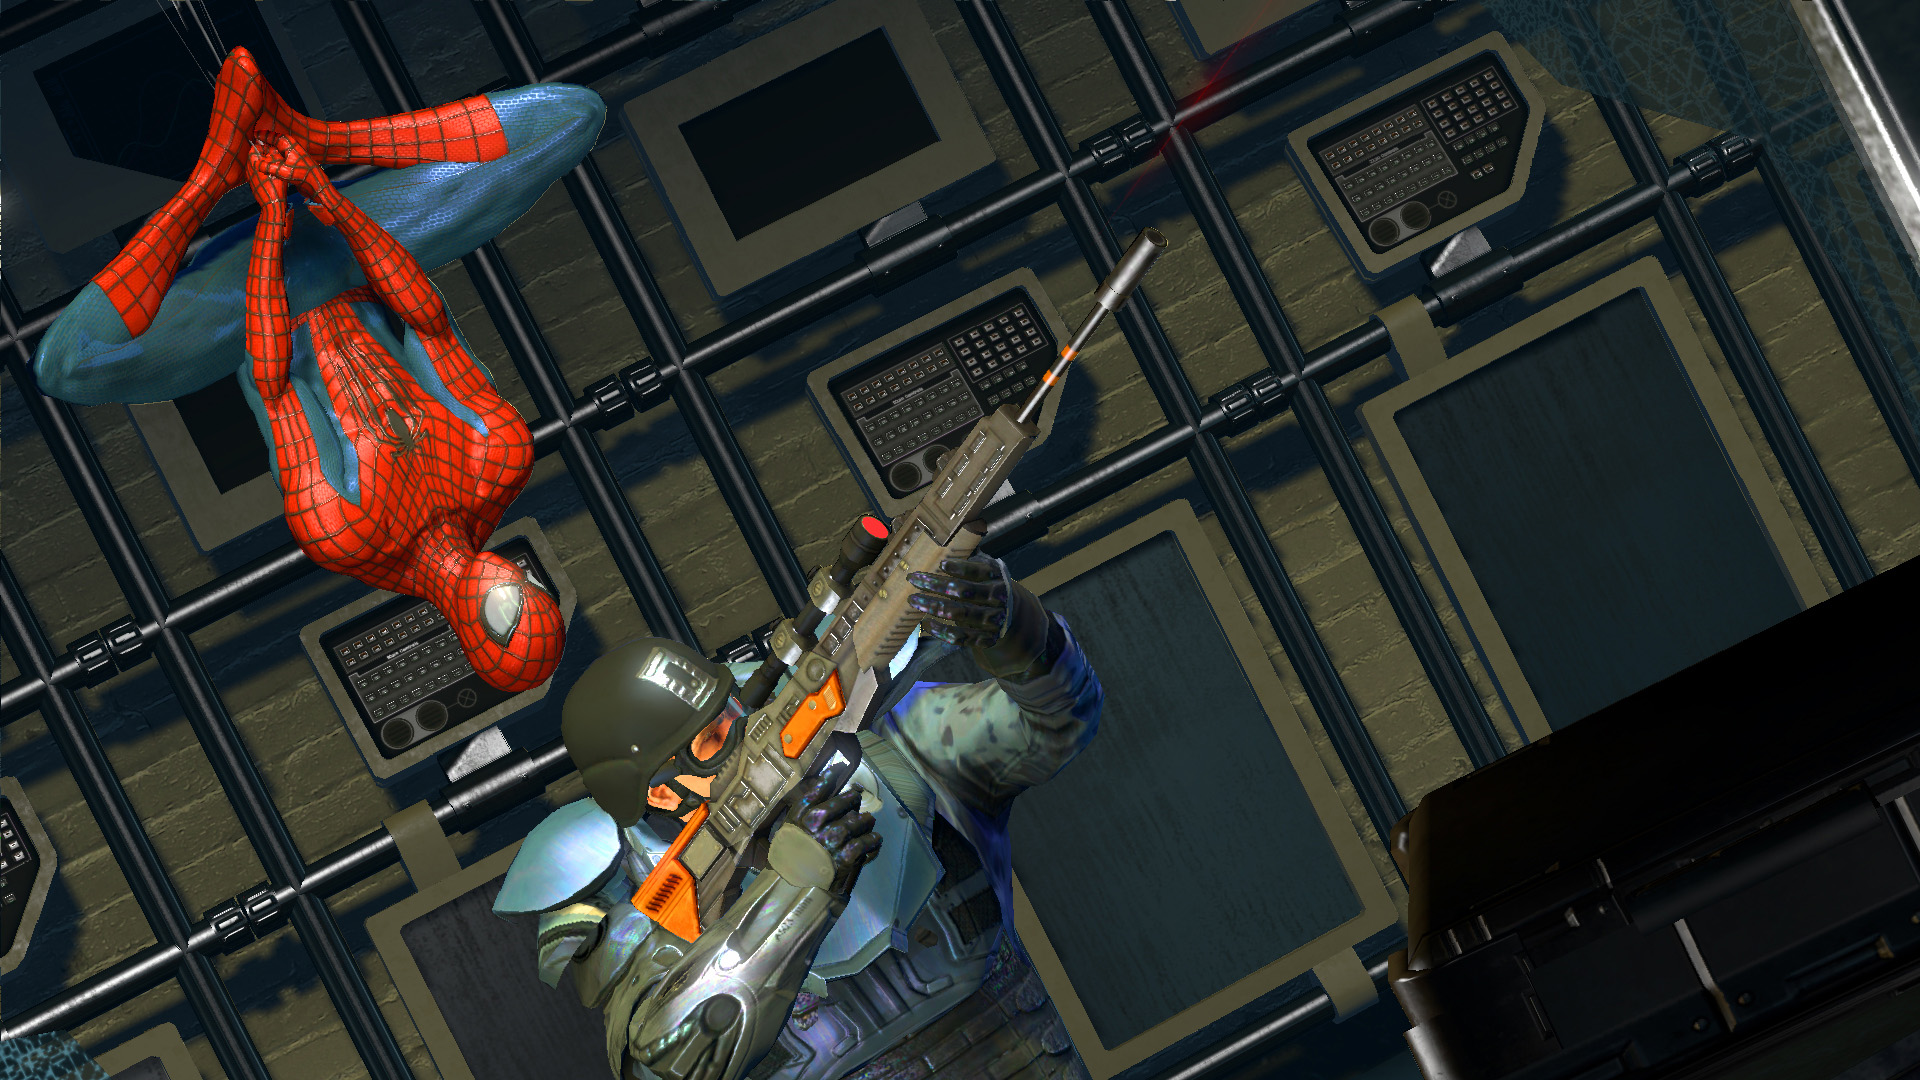 Kraven Stalks The First Trailer For The Amazing Spider-Man 2 Game